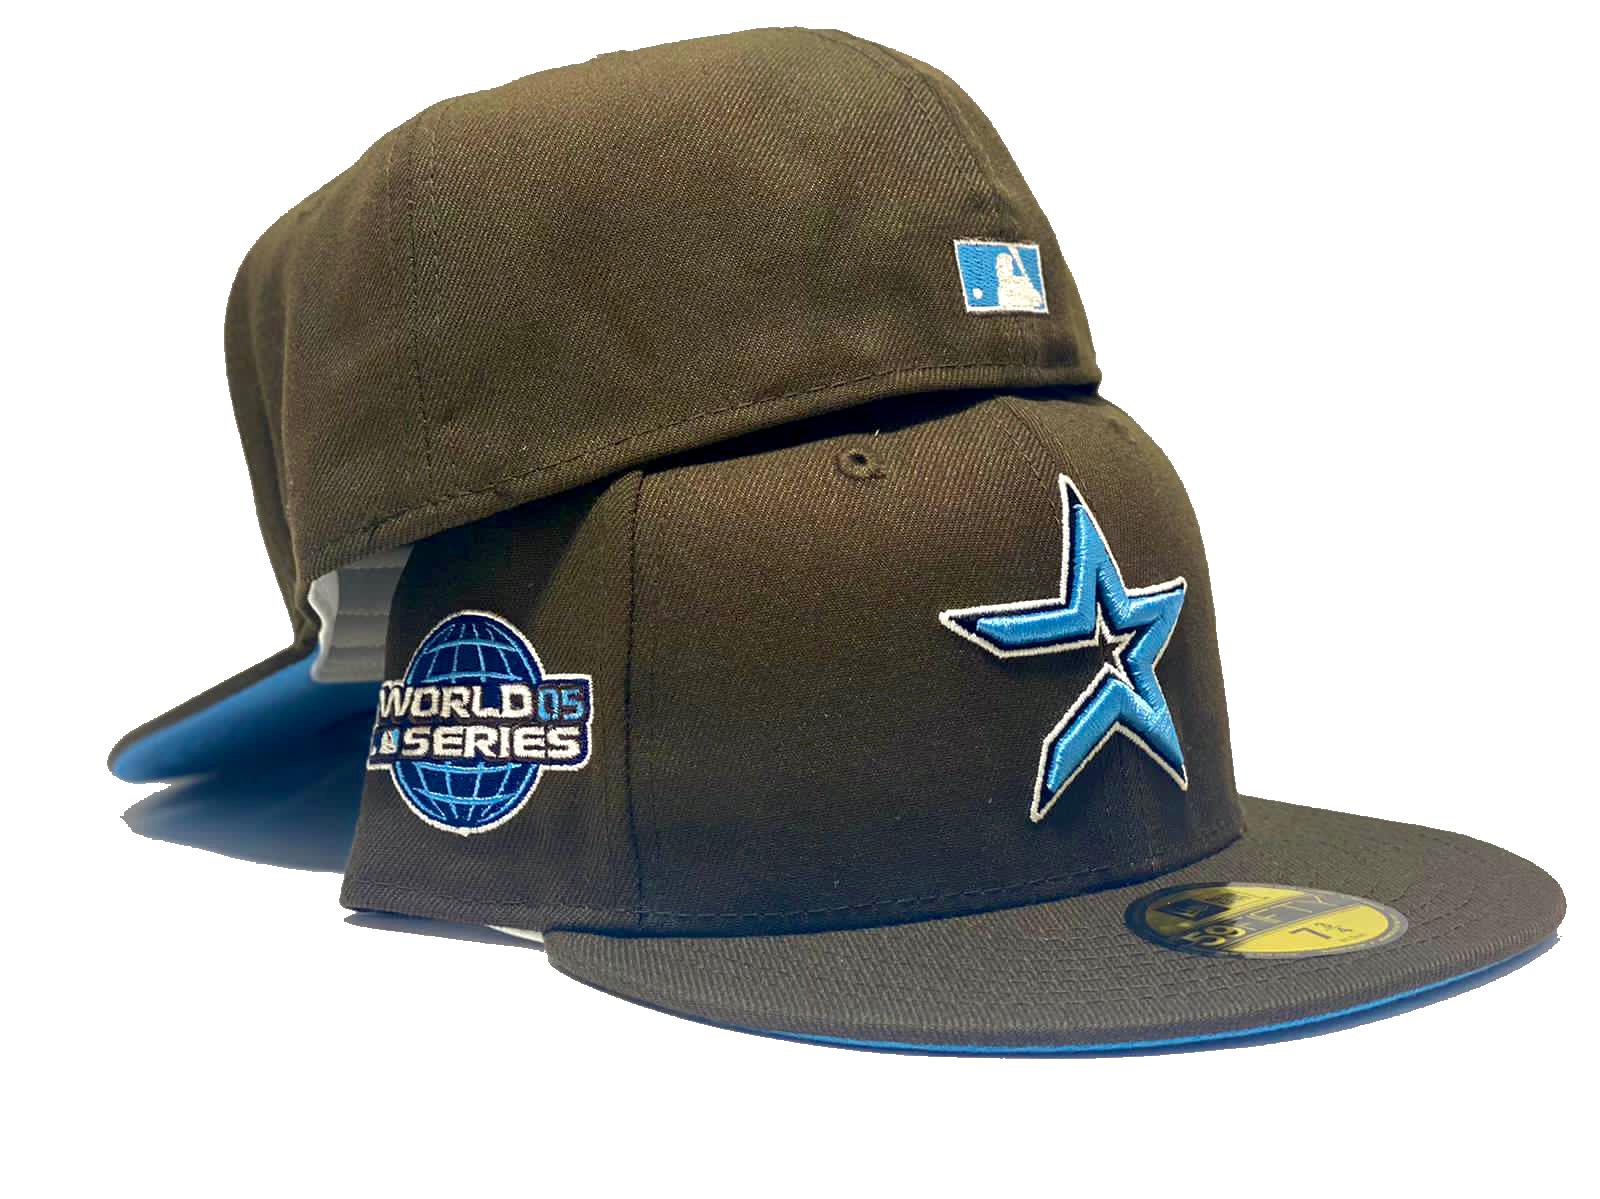 HOUSTON ASTROS 2005 WORLD SERIES SOFT YELLOW TEAL BRIM NEW ERA FITTED –  Sports World 165